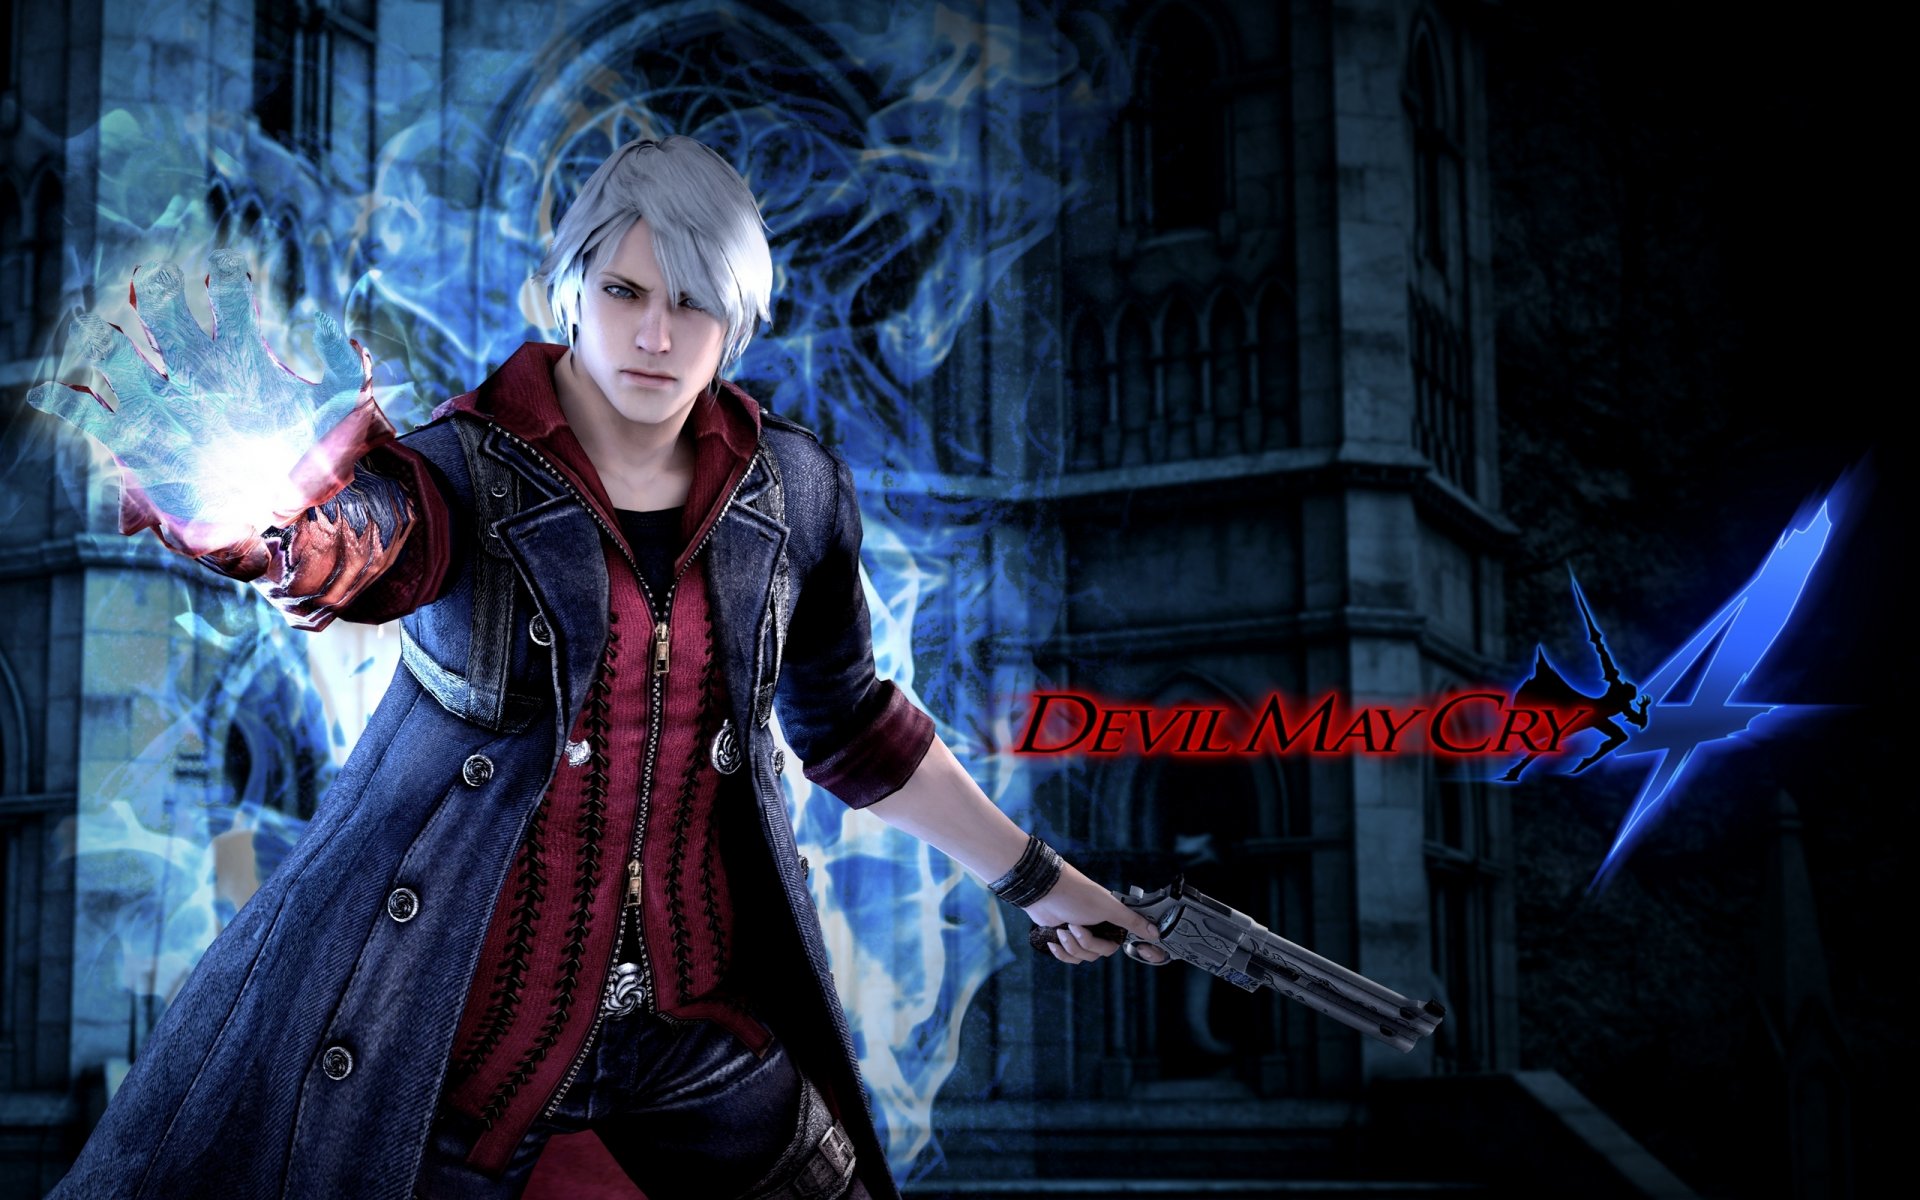 HD wallpaper devil may cry 4 dmc 4 game wallpapers ceriselightning.